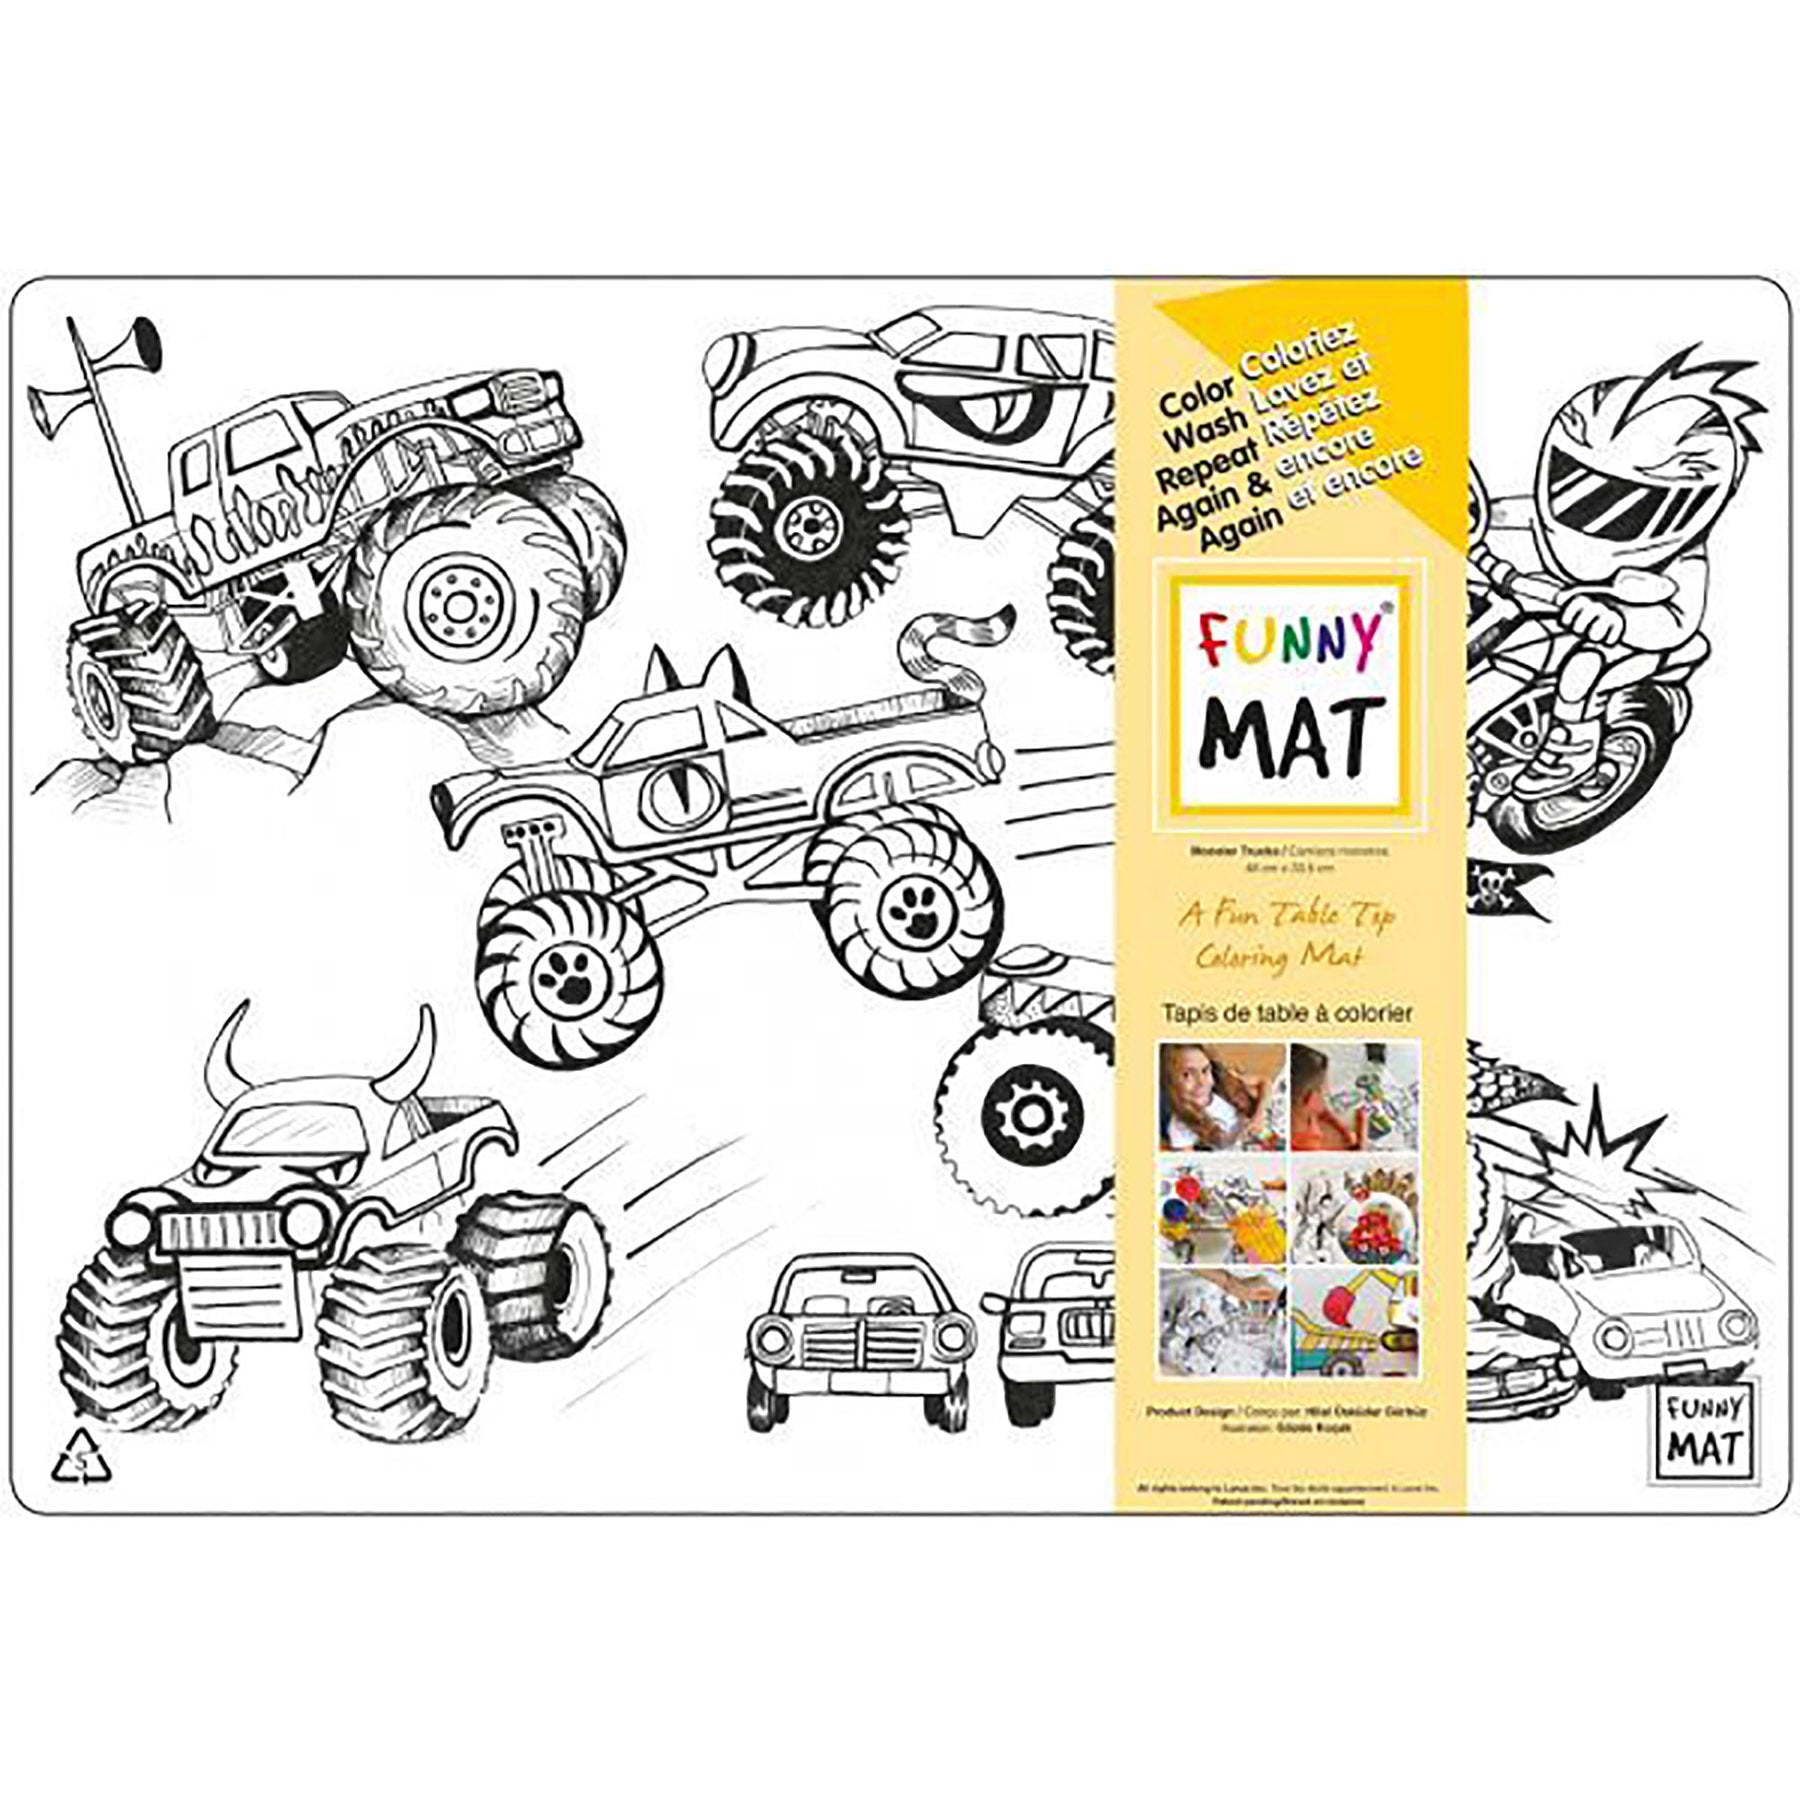 Funny Mat Coloring Placemat - Monster Trucks 18.9x13.2in